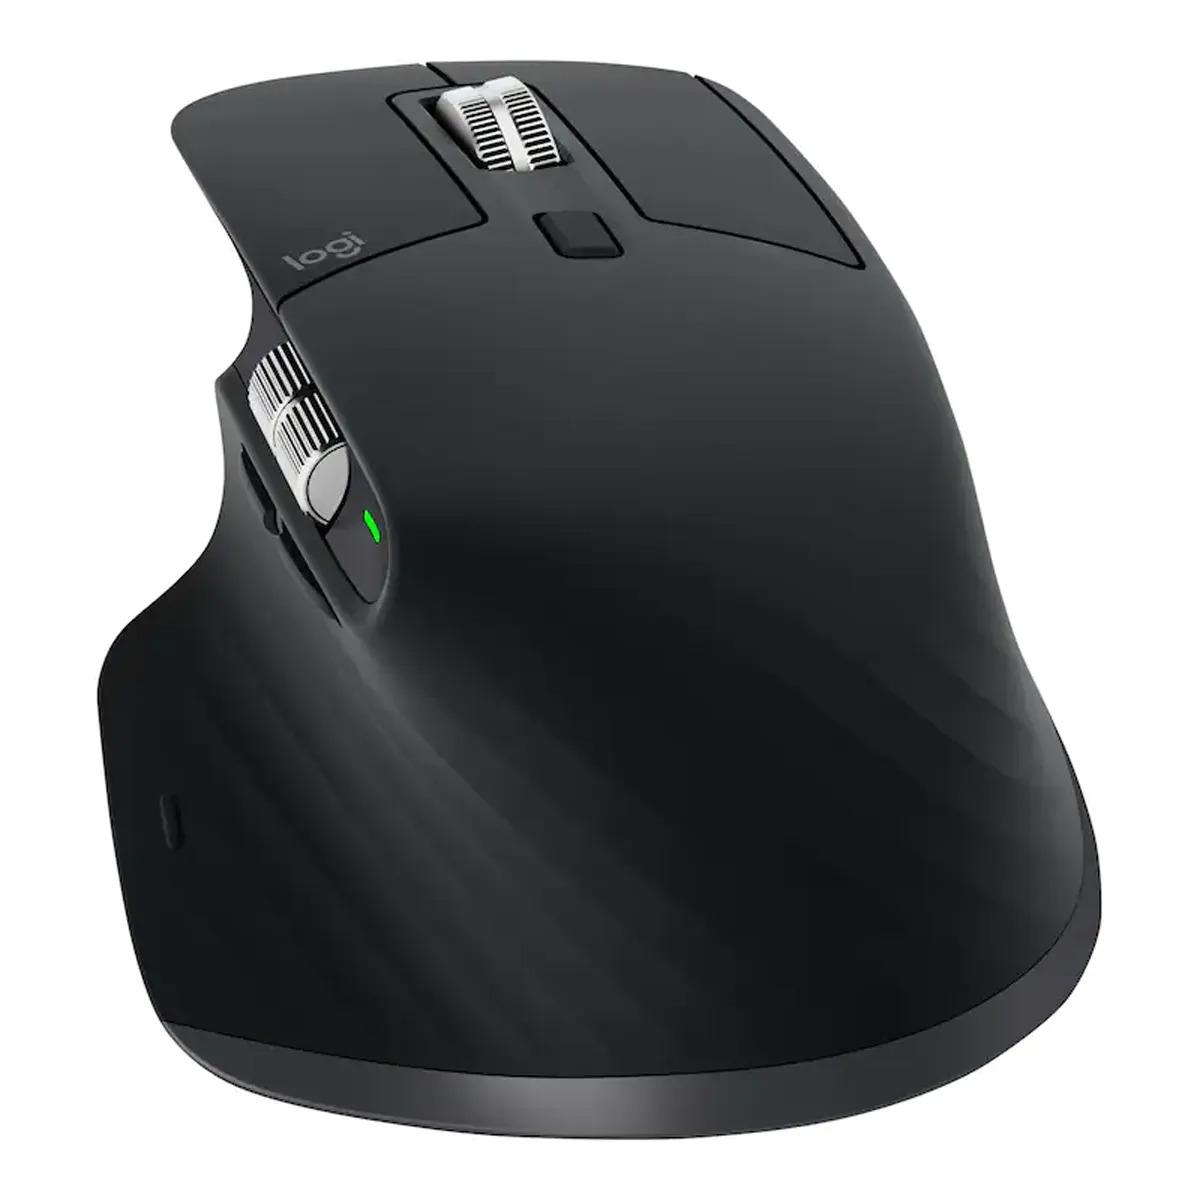 Logitech MX Master 3 Advanced Laser Mouse with $40 Gift Card for $99.99 Shipped